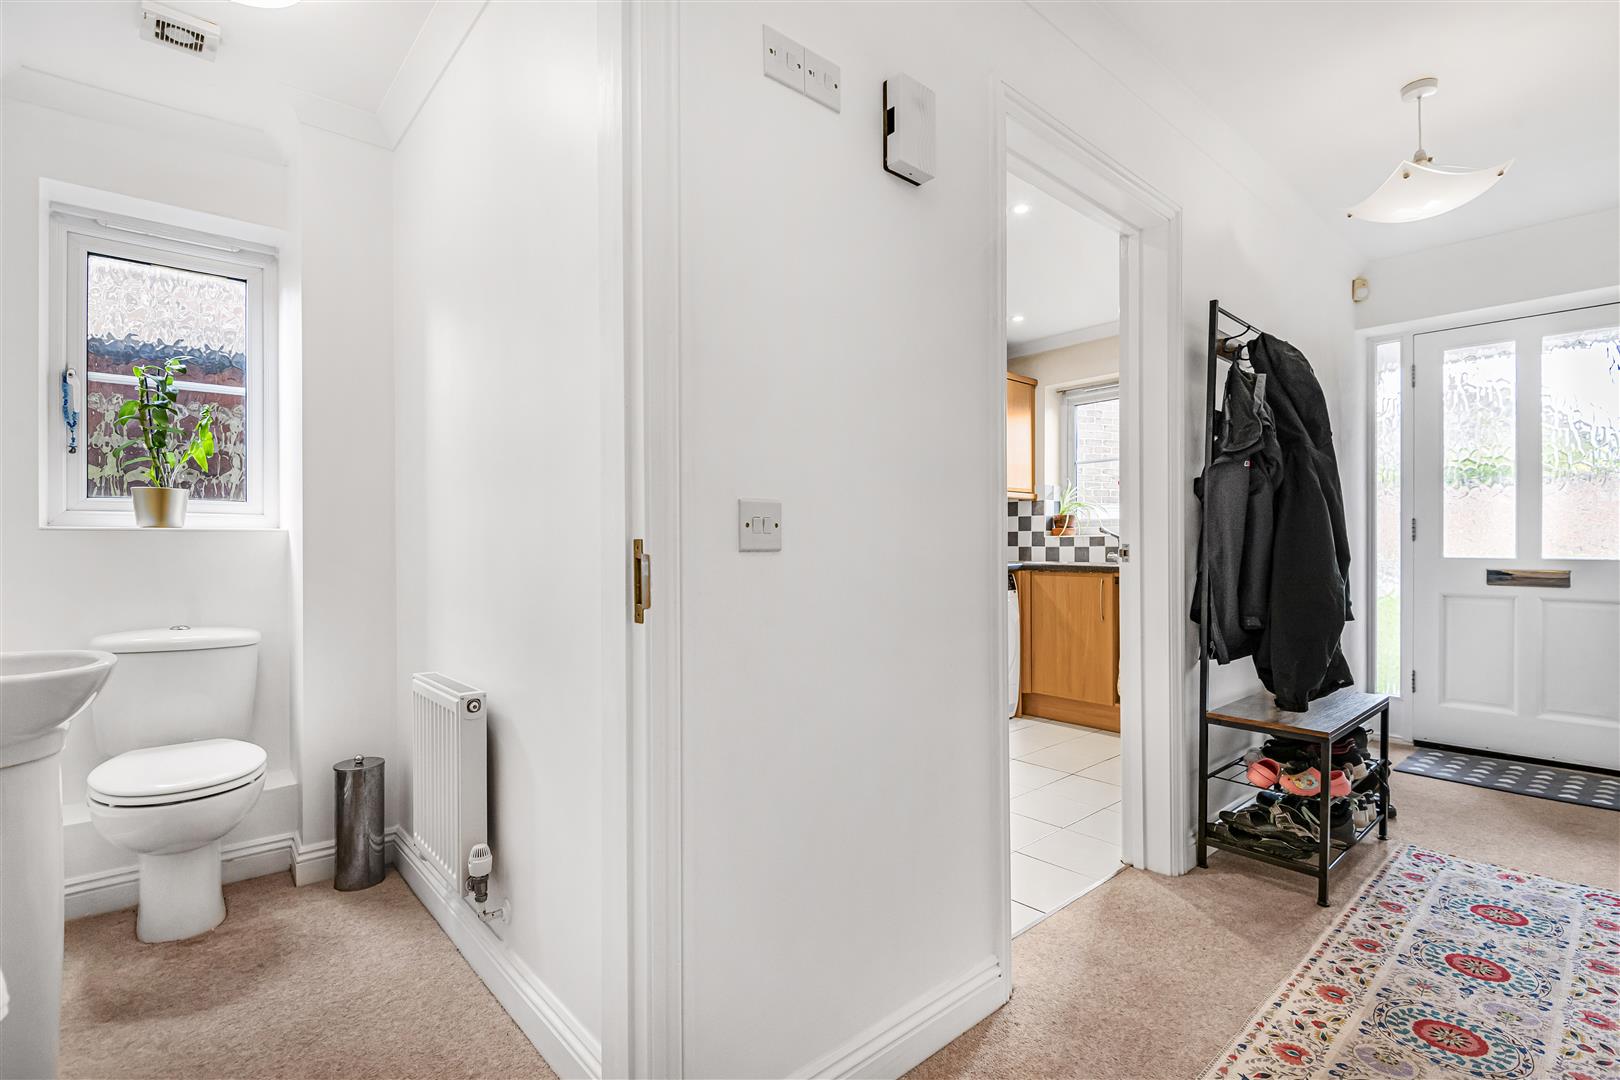 Grove Mews Emmer Green house for sale in Reading